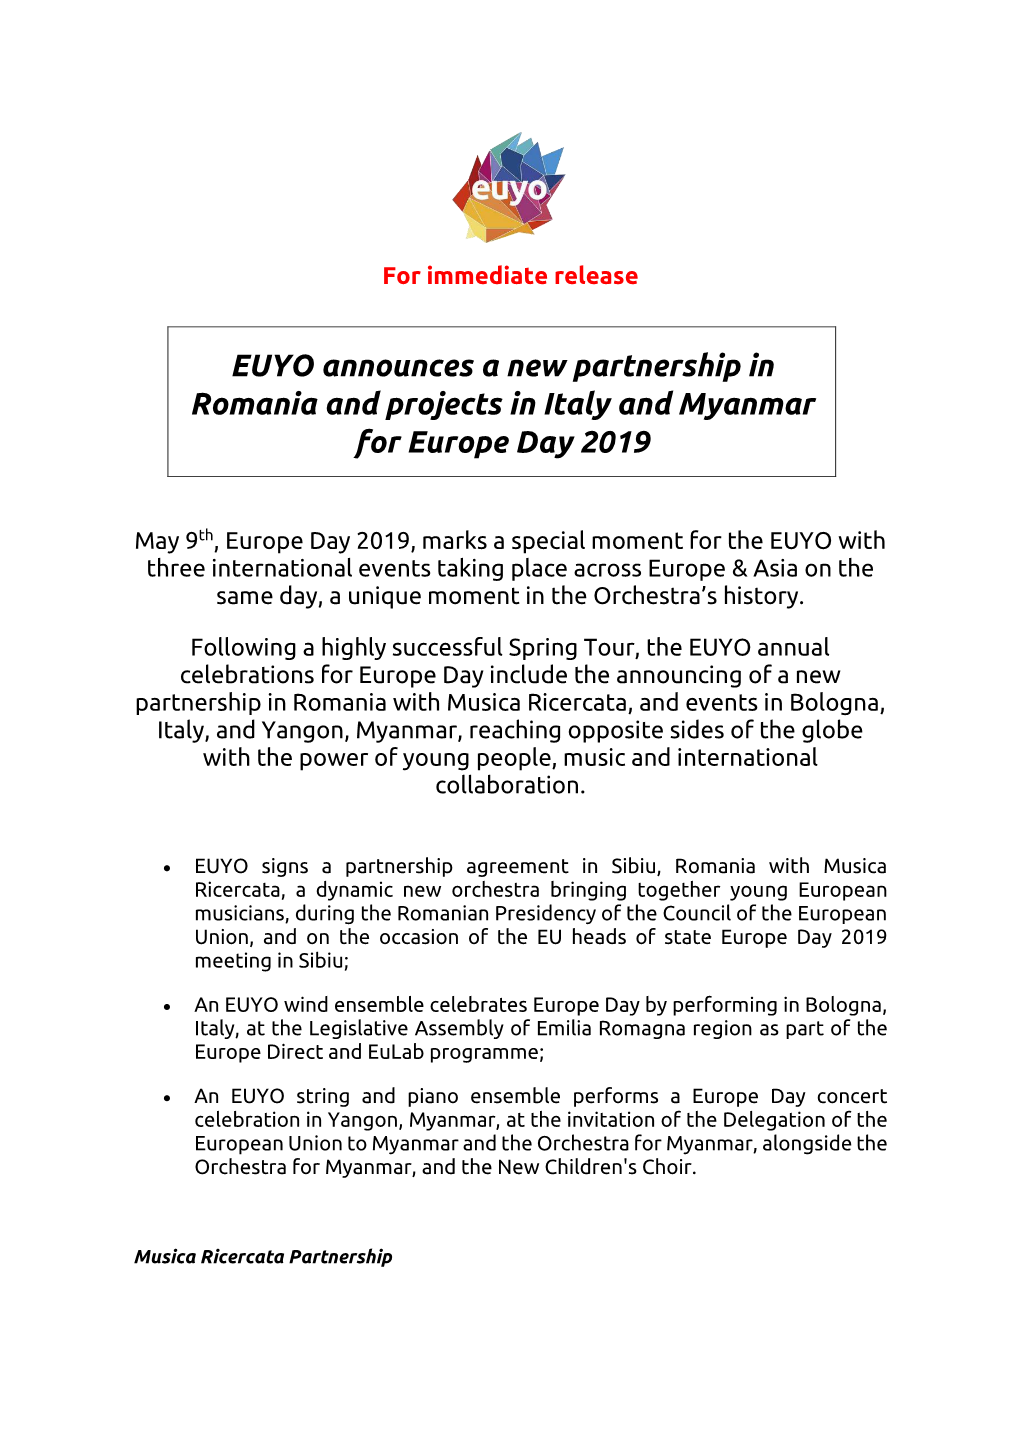 EUYO Announces a New Partnership in Romania and Projects in Italy and Myanmar